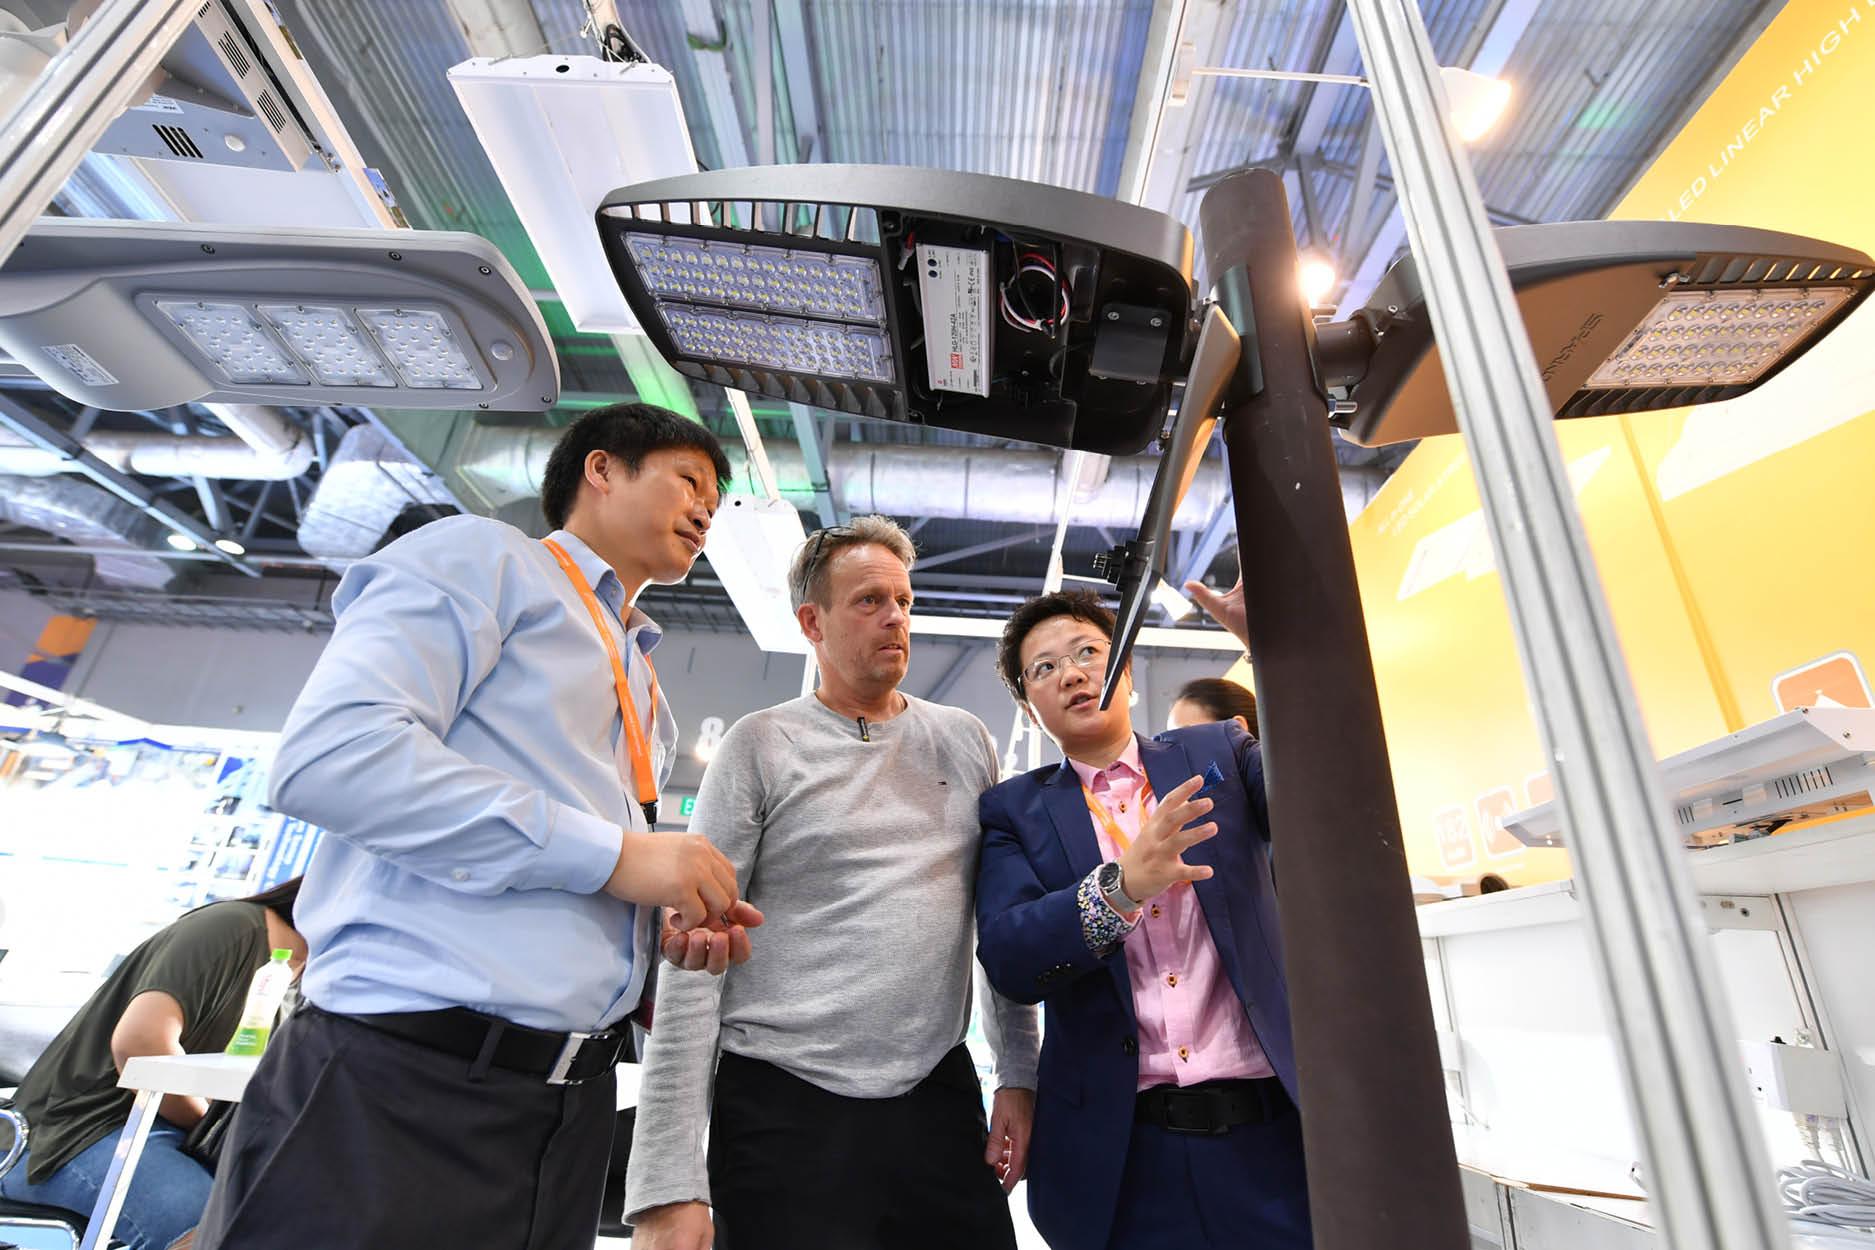 HKTDC Twin Lighting Fairs Illuminate Smart Products, Ideas and Trends